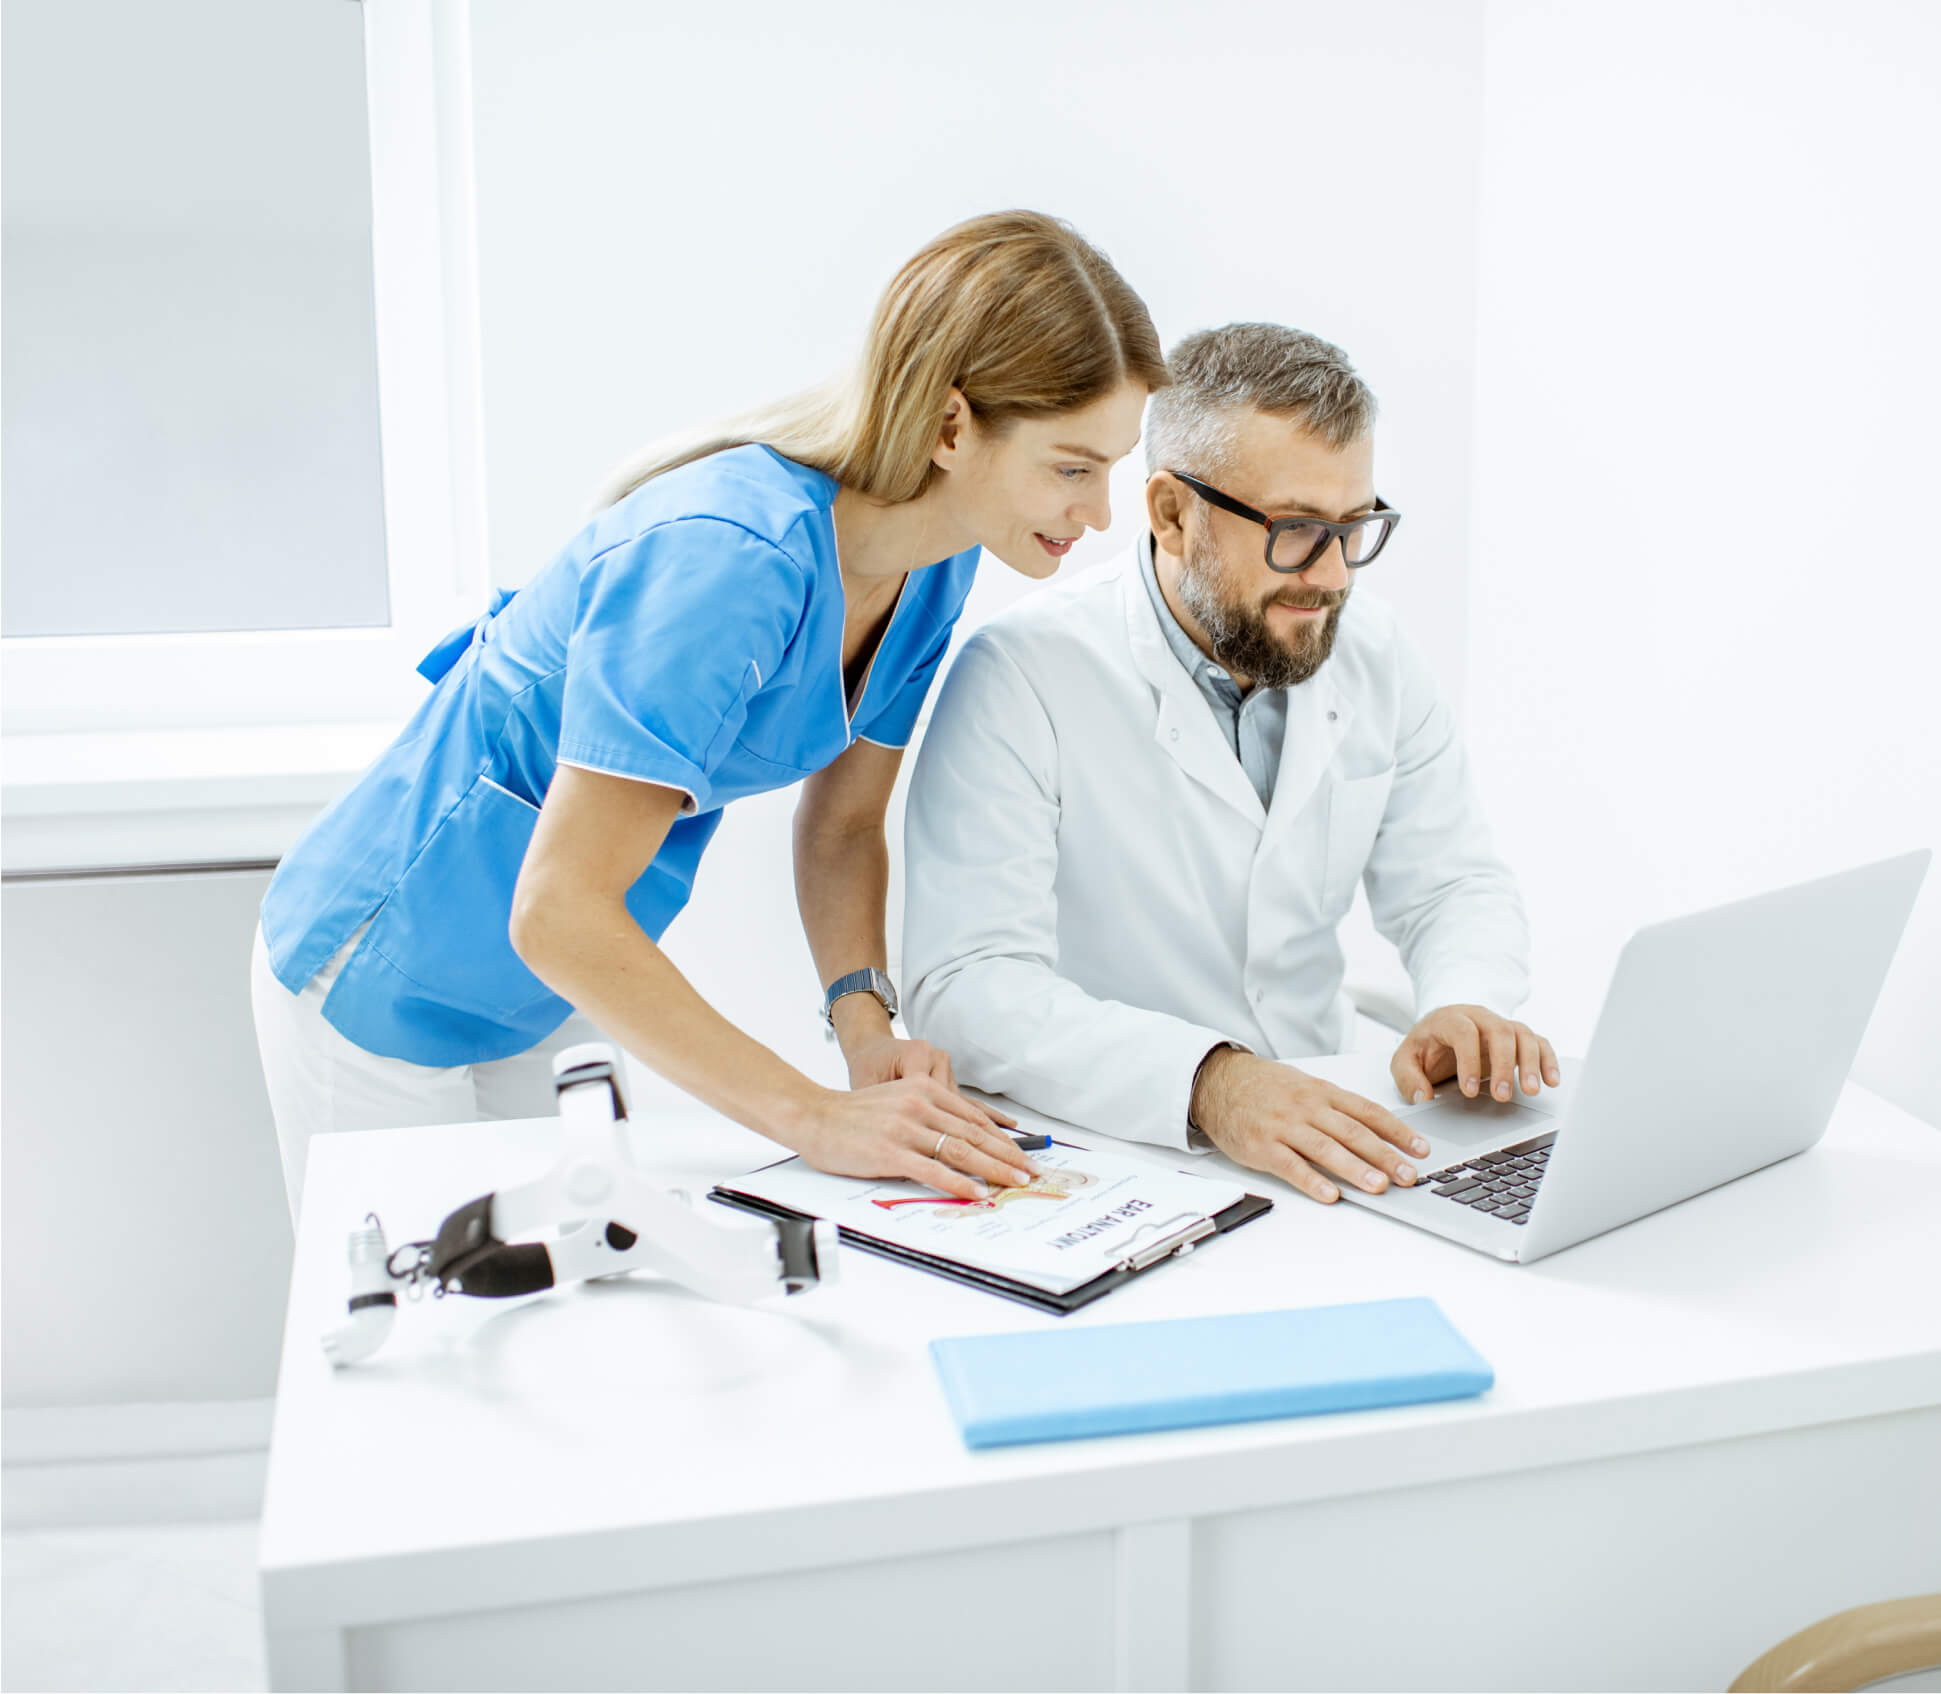 Doctor and nurse reviewing patient information on a laptop together